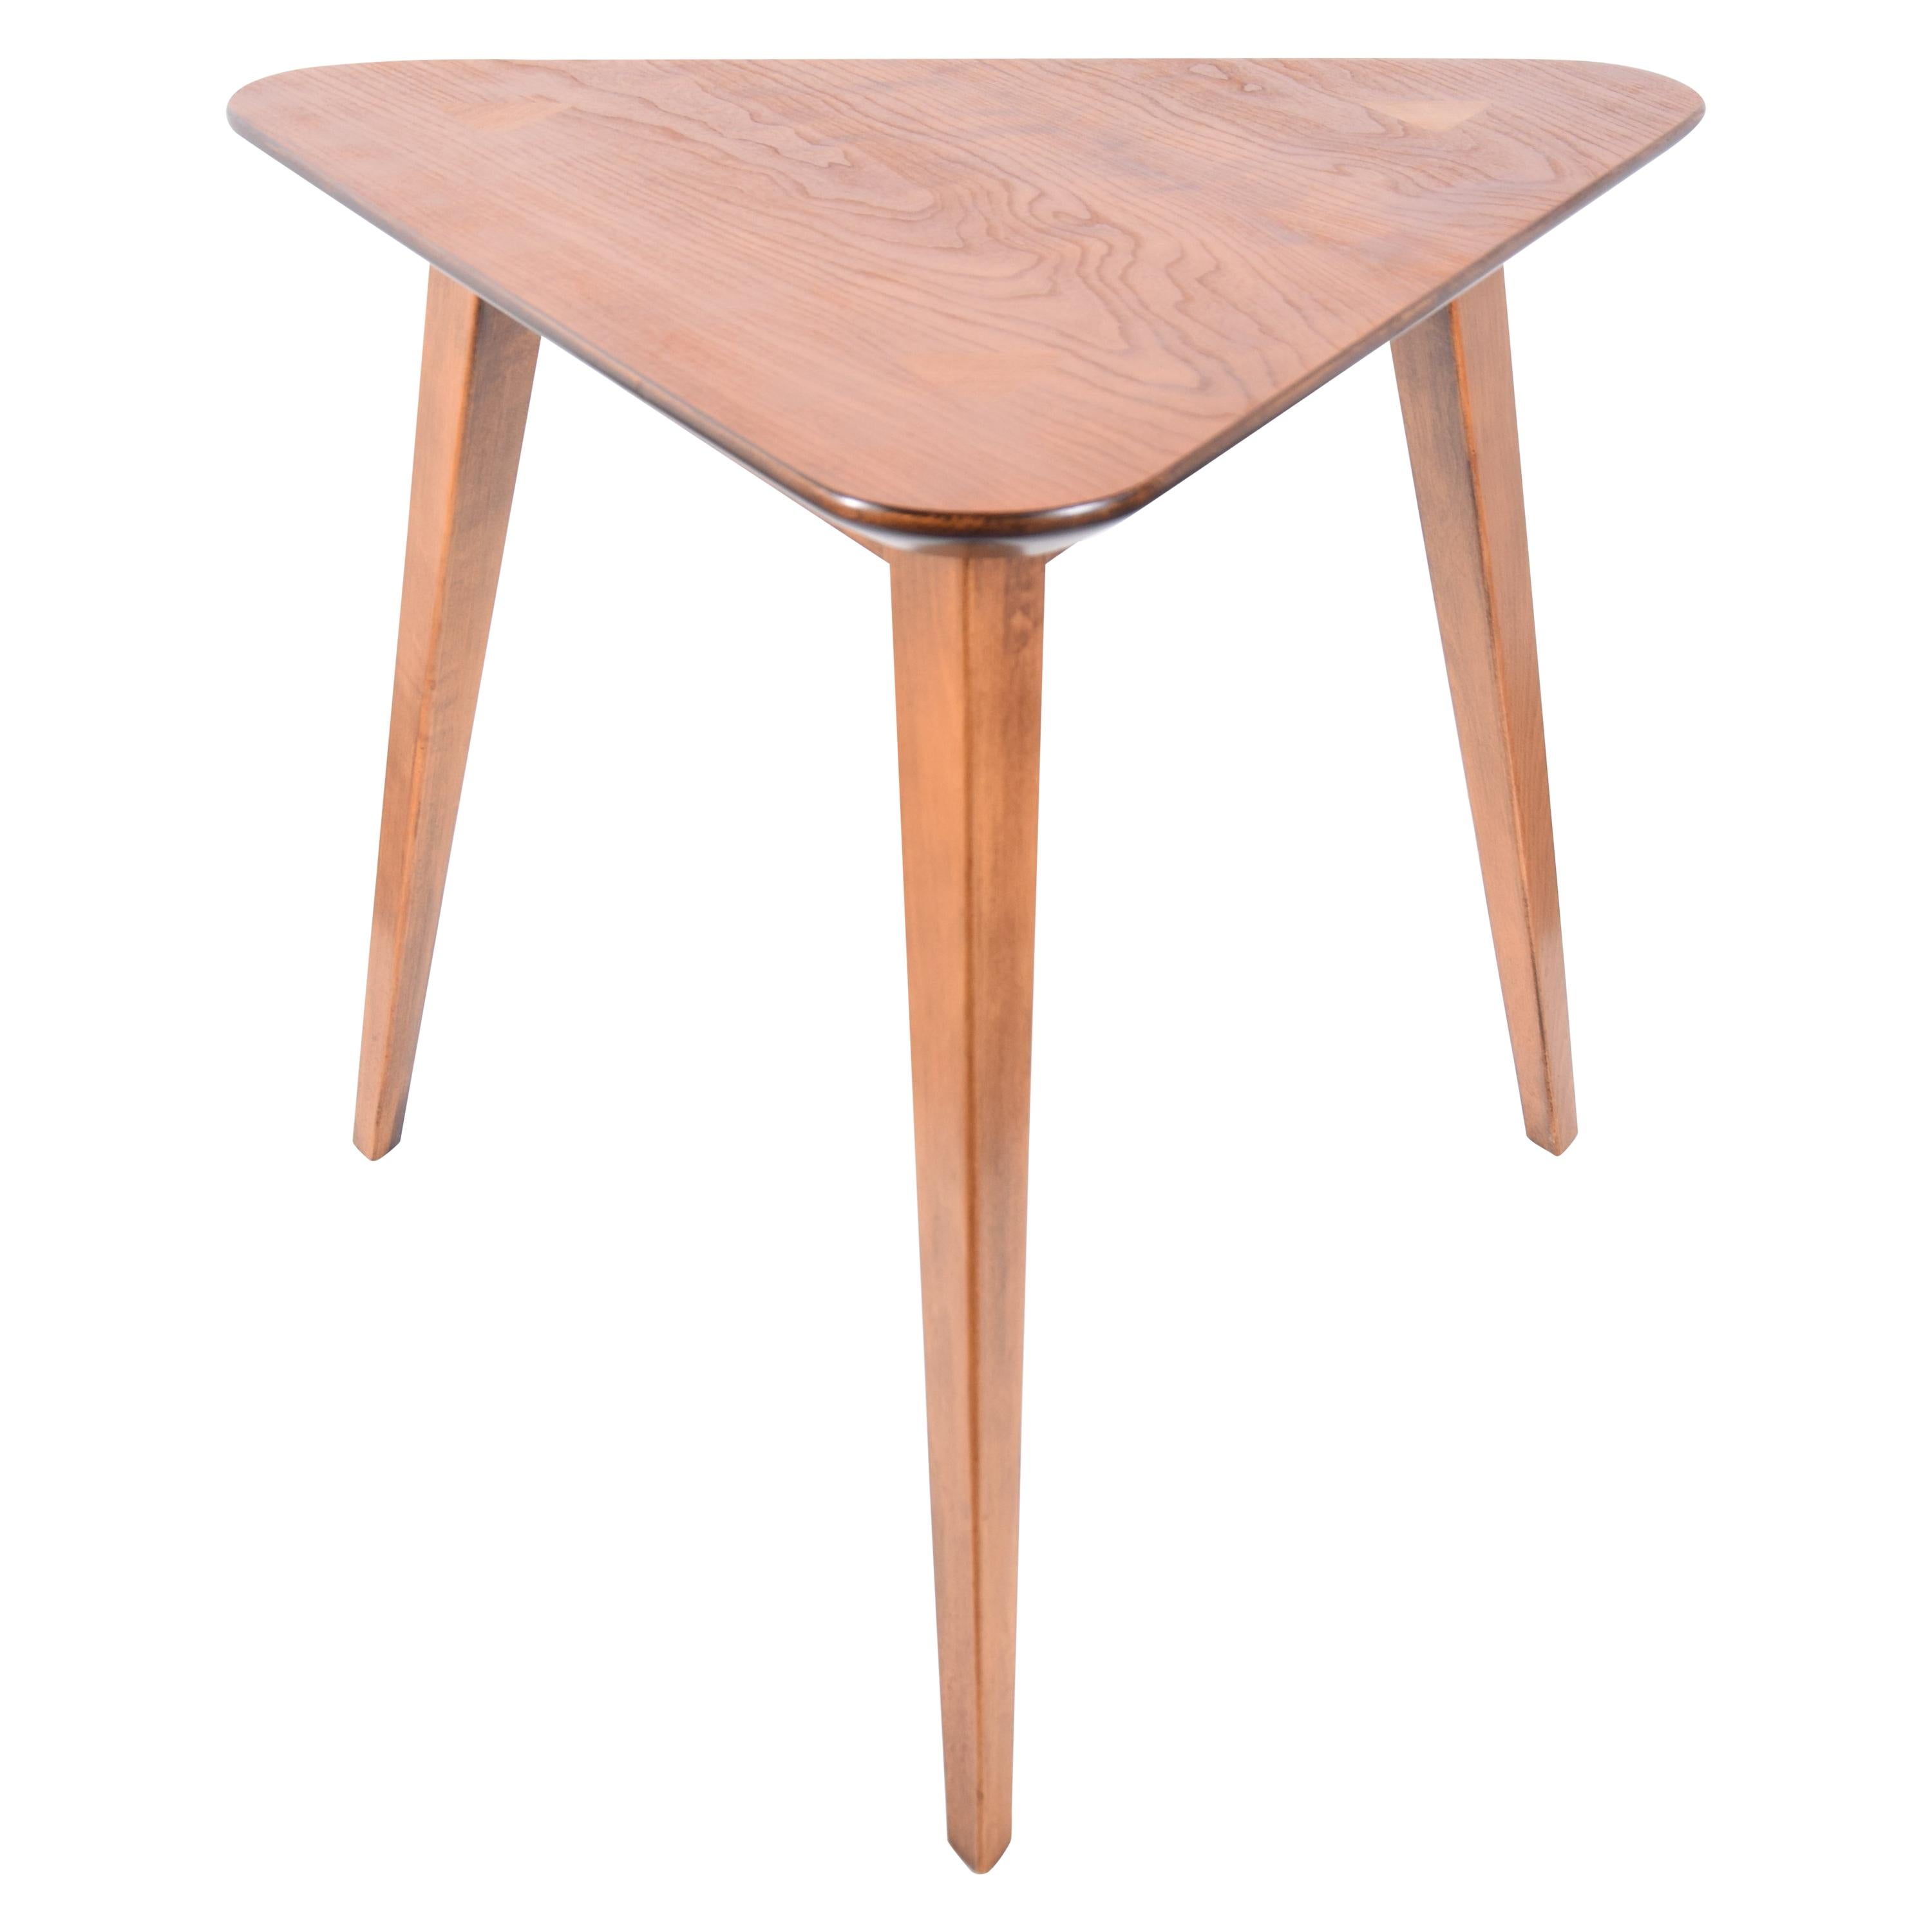 Triangular Top Lamp Table For Sale